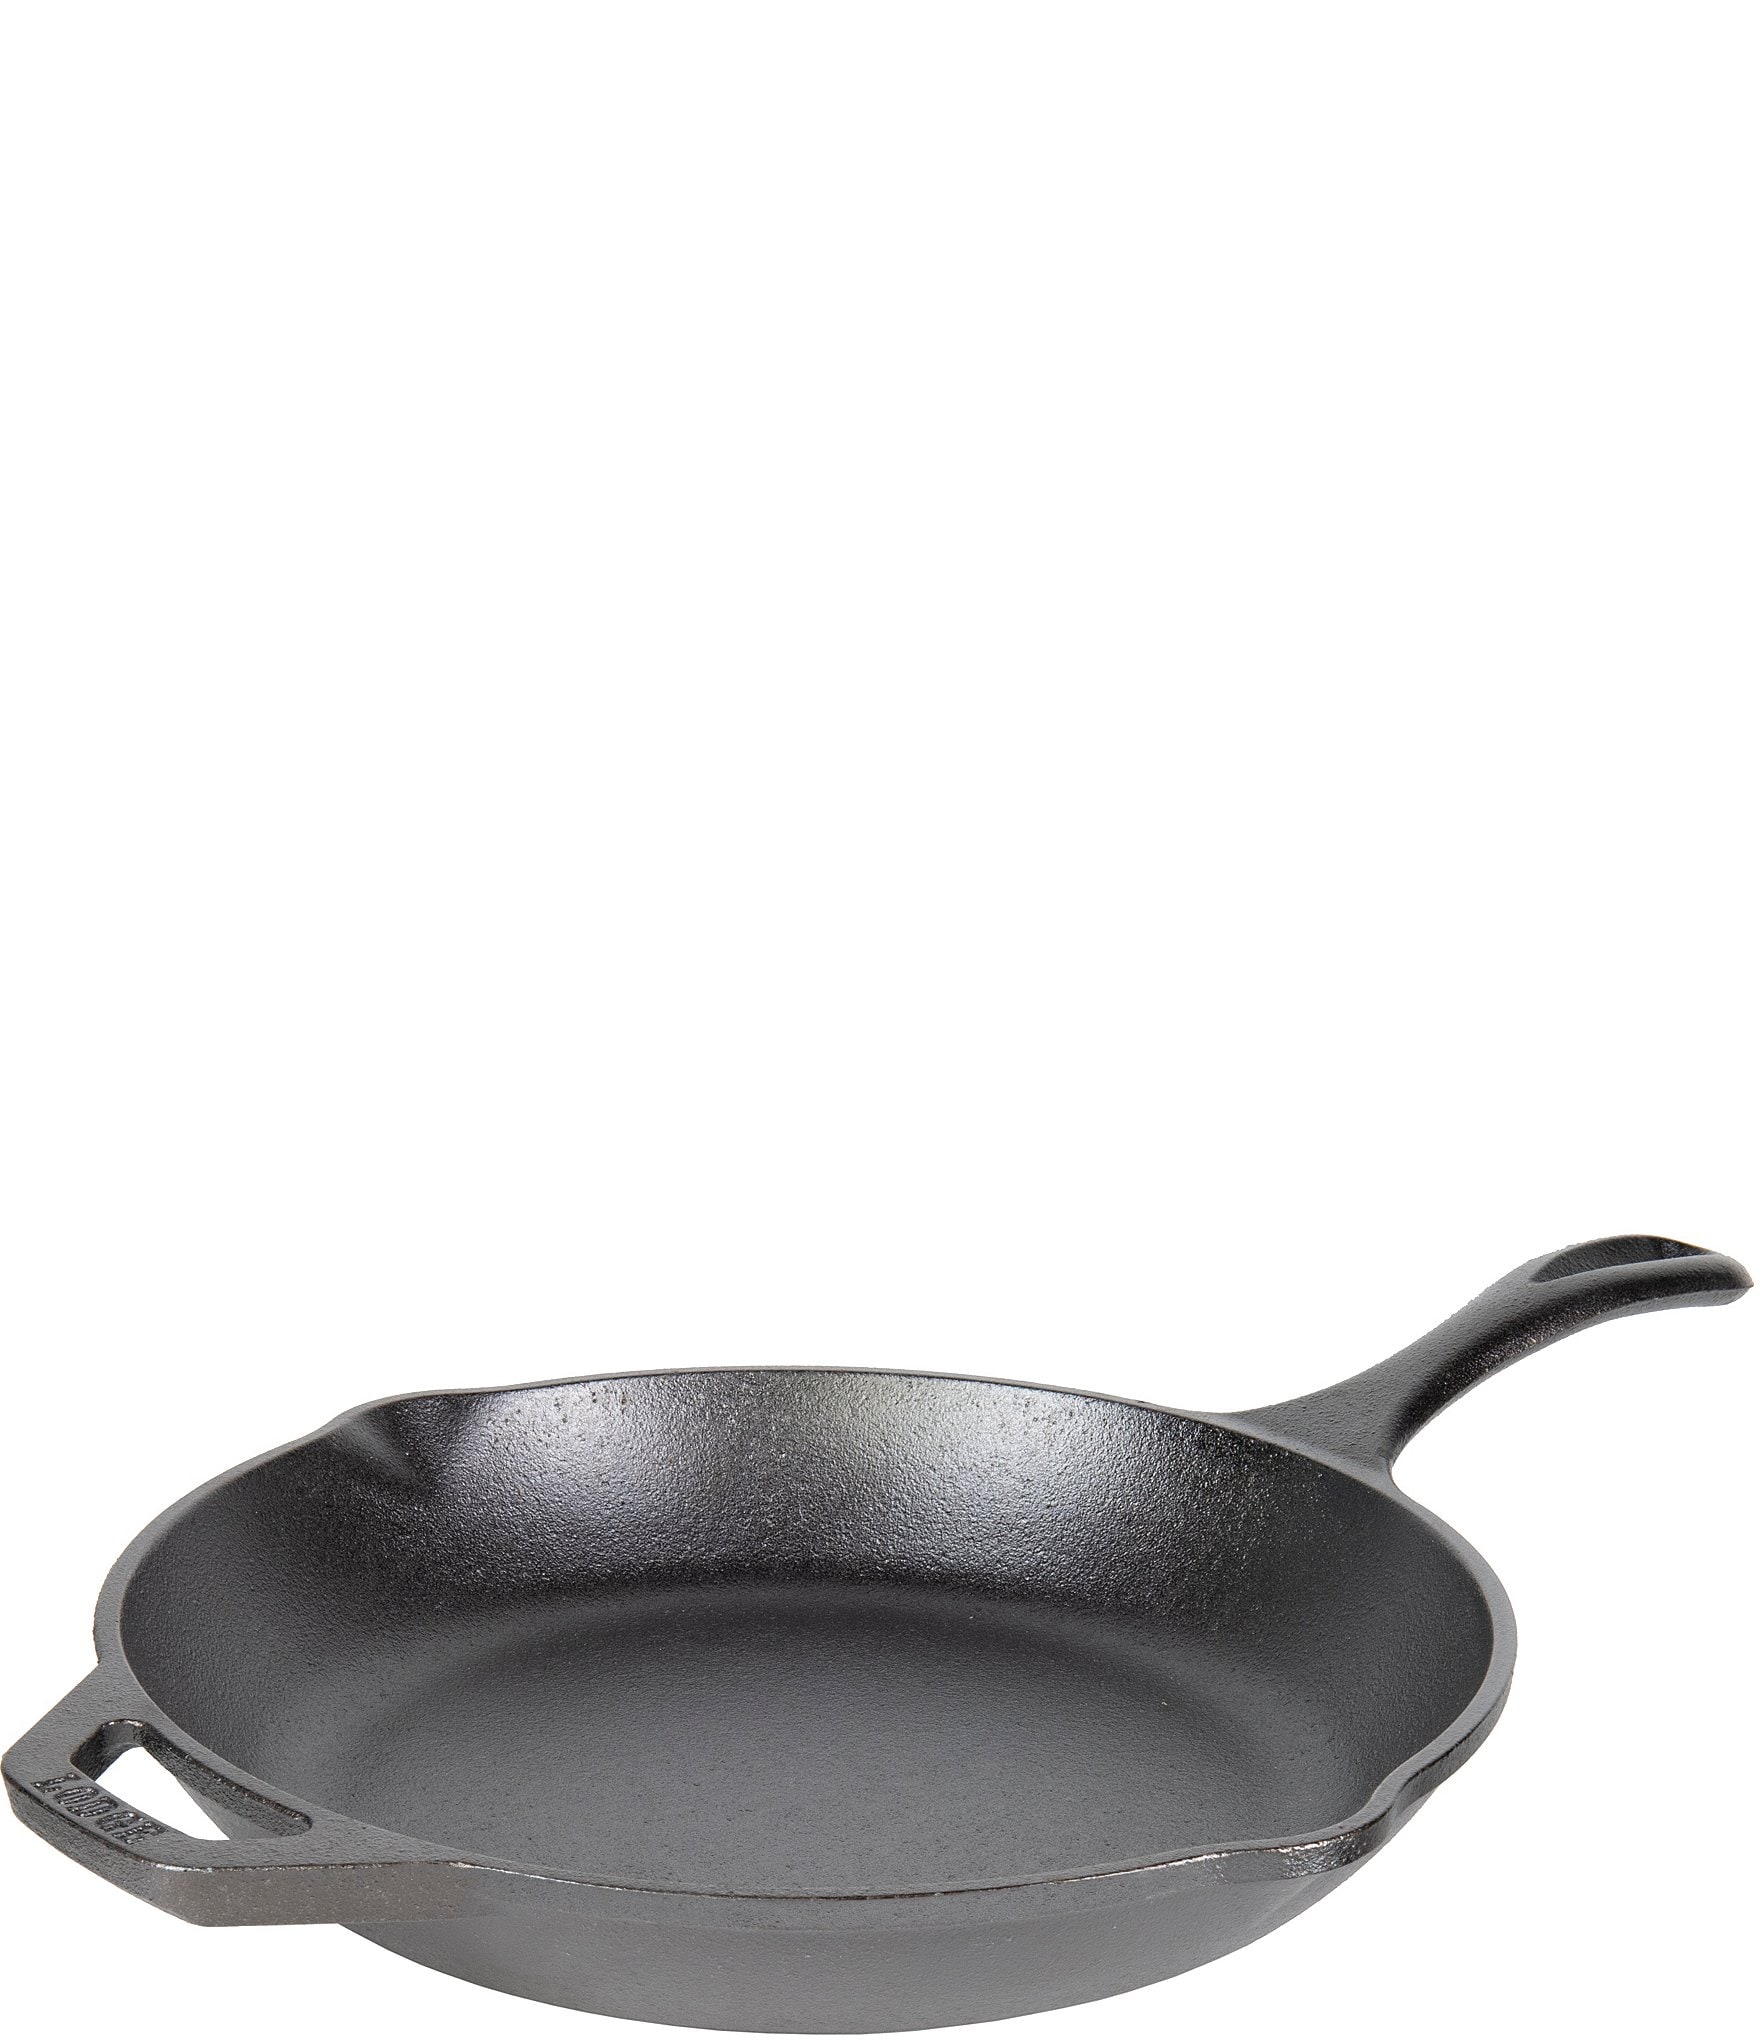 Lodge Chef Collection 10 Inch Cast Iron Chef Style Skillet. Seasoned and  Ready for the Stove, Grill or Campfire. Made from Quality Materials for a